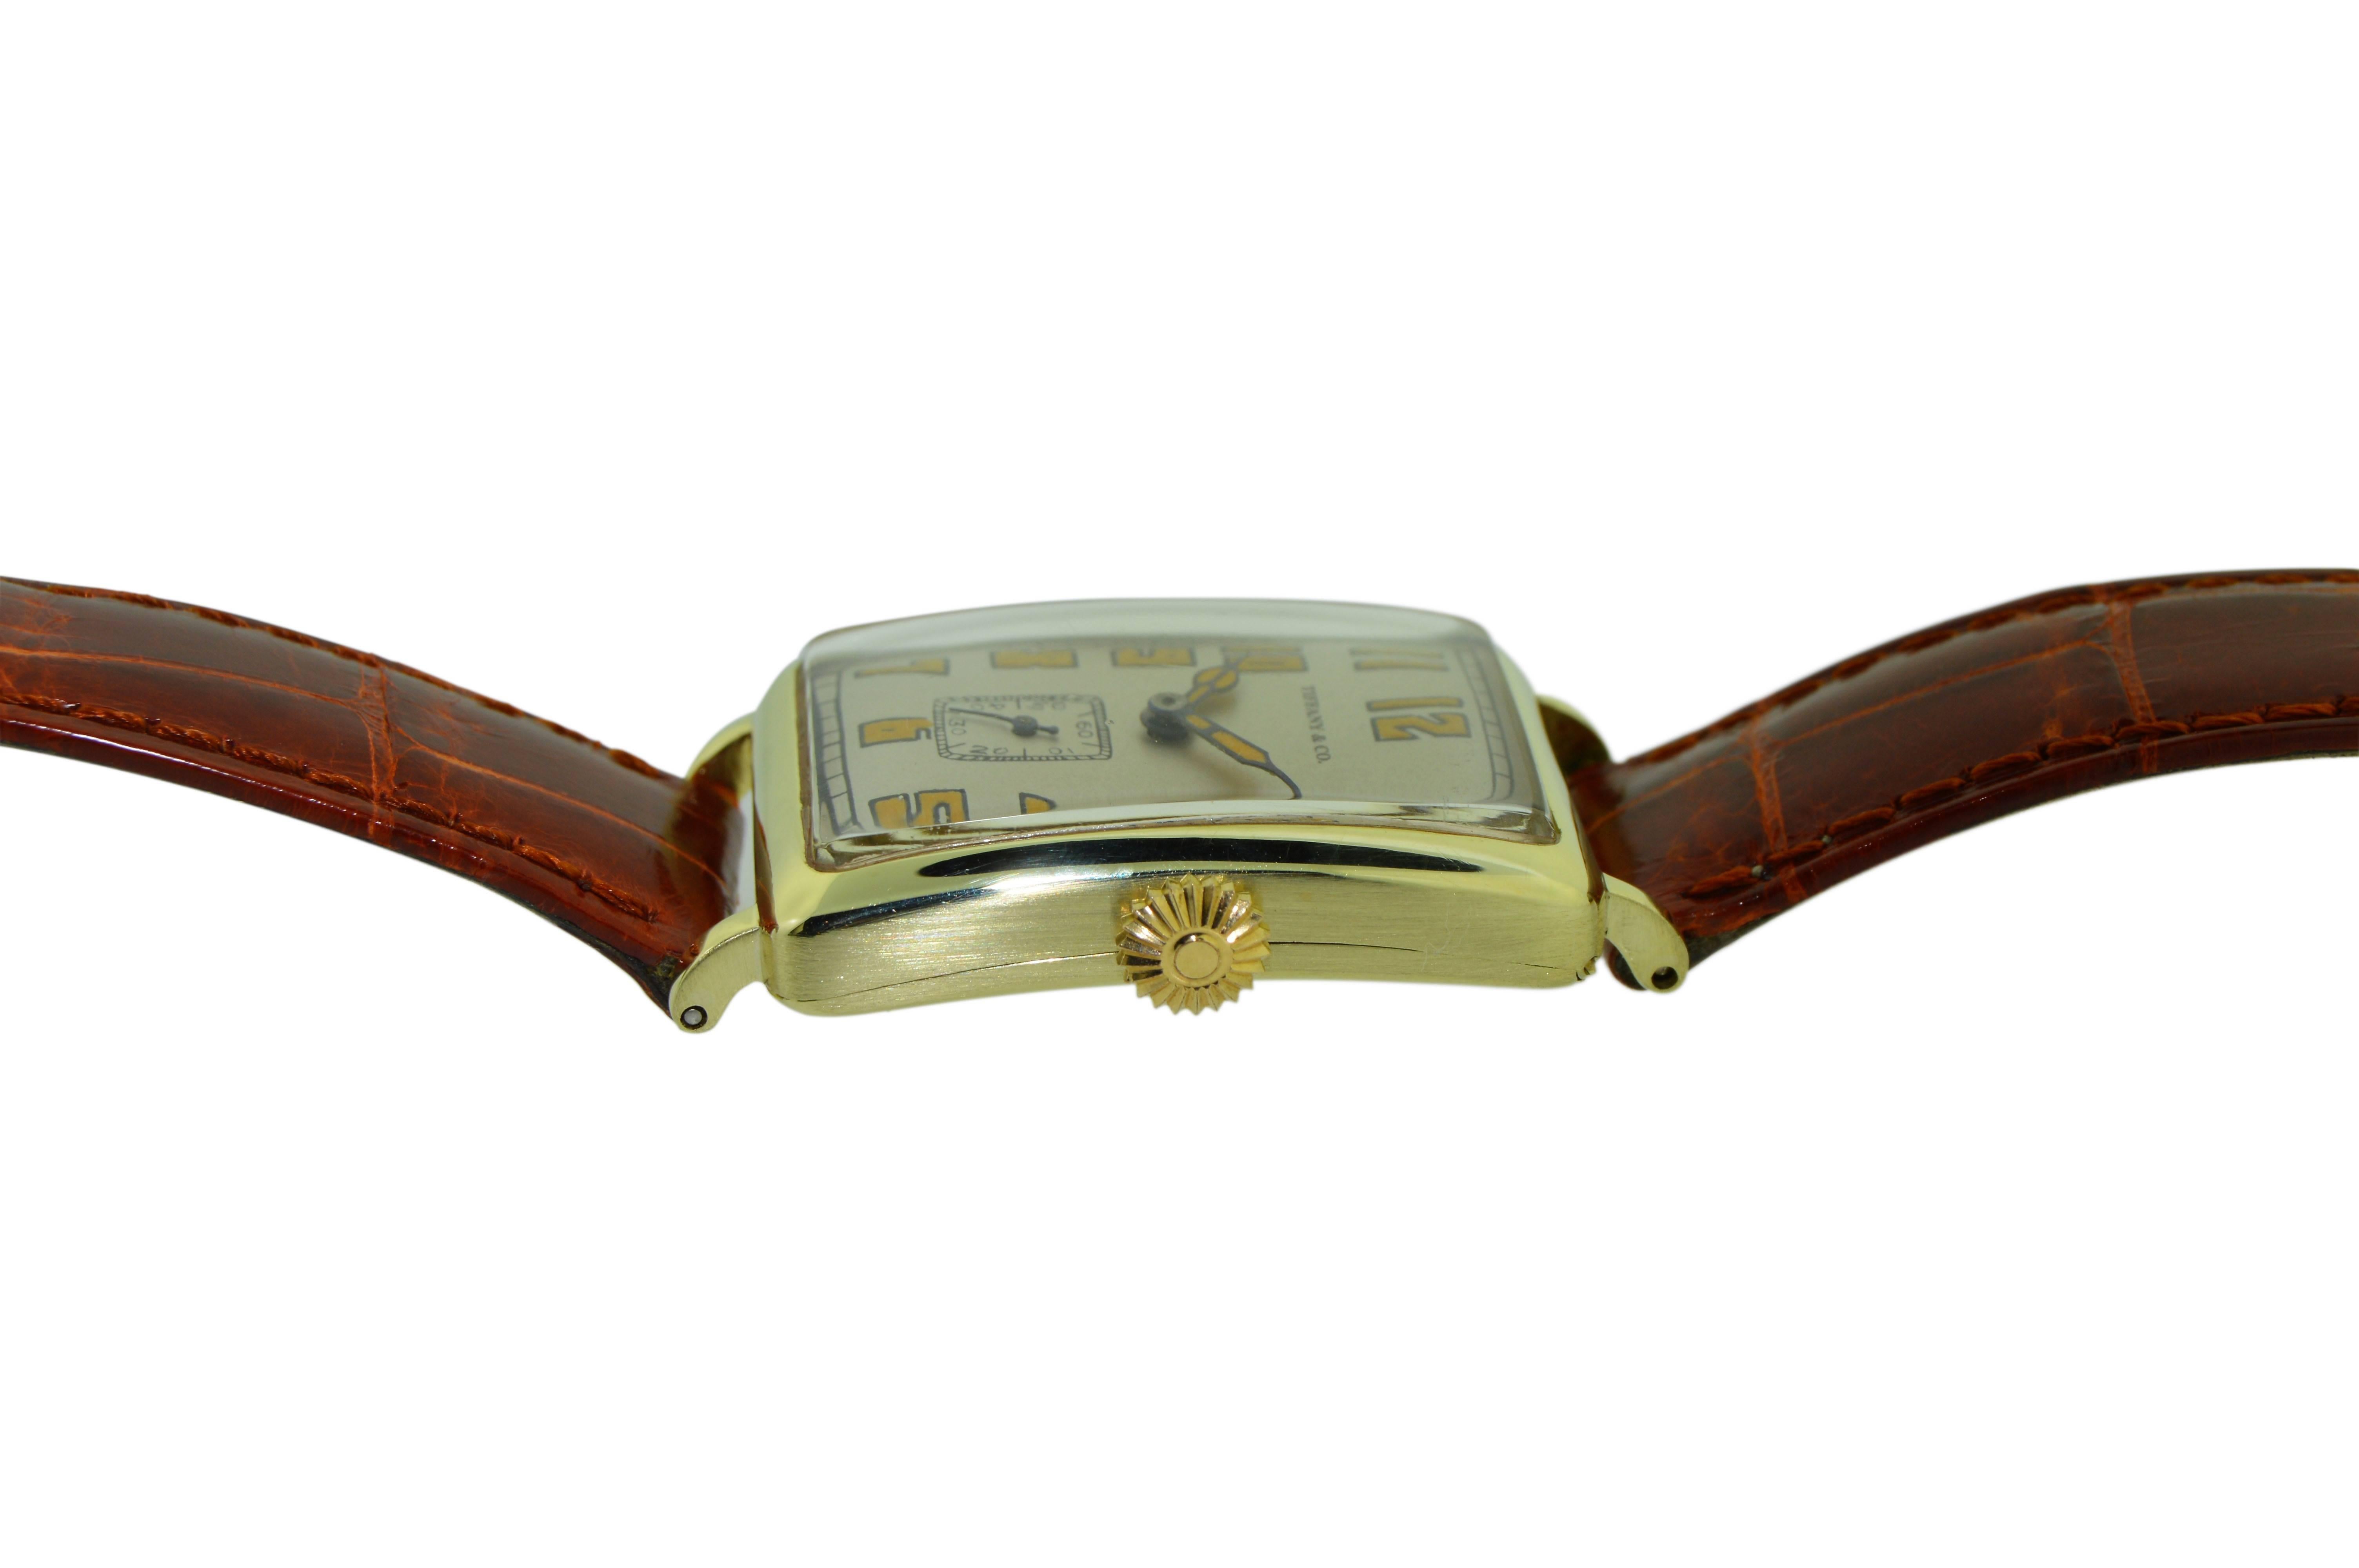 FACTORY / HOUSE: Longines Watch Company for Tiffany and Co.
STYLE / REFERENCE: Art Deco / Tank Style
METAL / MATERIAL: 14 Kt. Solid Gold
DIMENSIONS: 34mm X 25mm
CIRCA: 1920's
MOVEMENT / CALIBER: Manual Winding / 15 Jewels / Cal. 10.86
DIAL / HANDS: